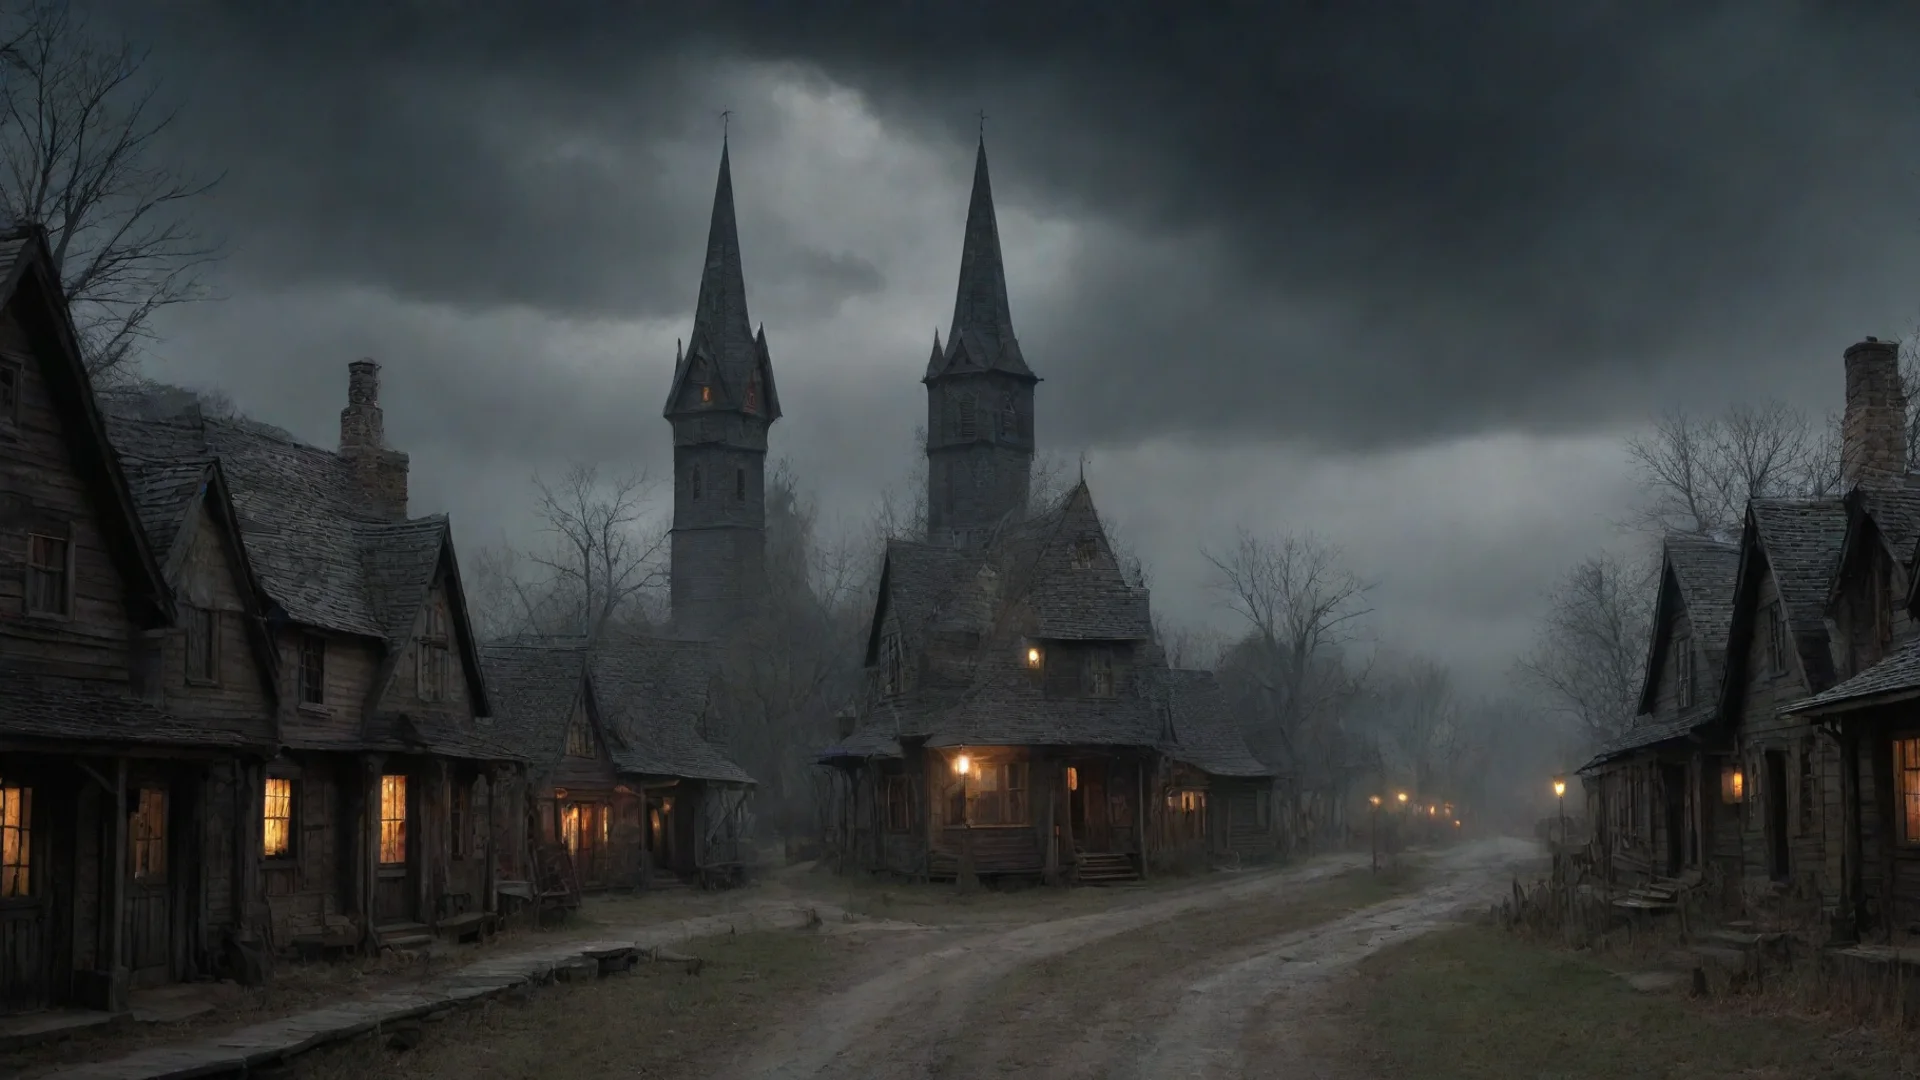 old spooky town 1800s vampire town steeple olden days windswept hd epic wide